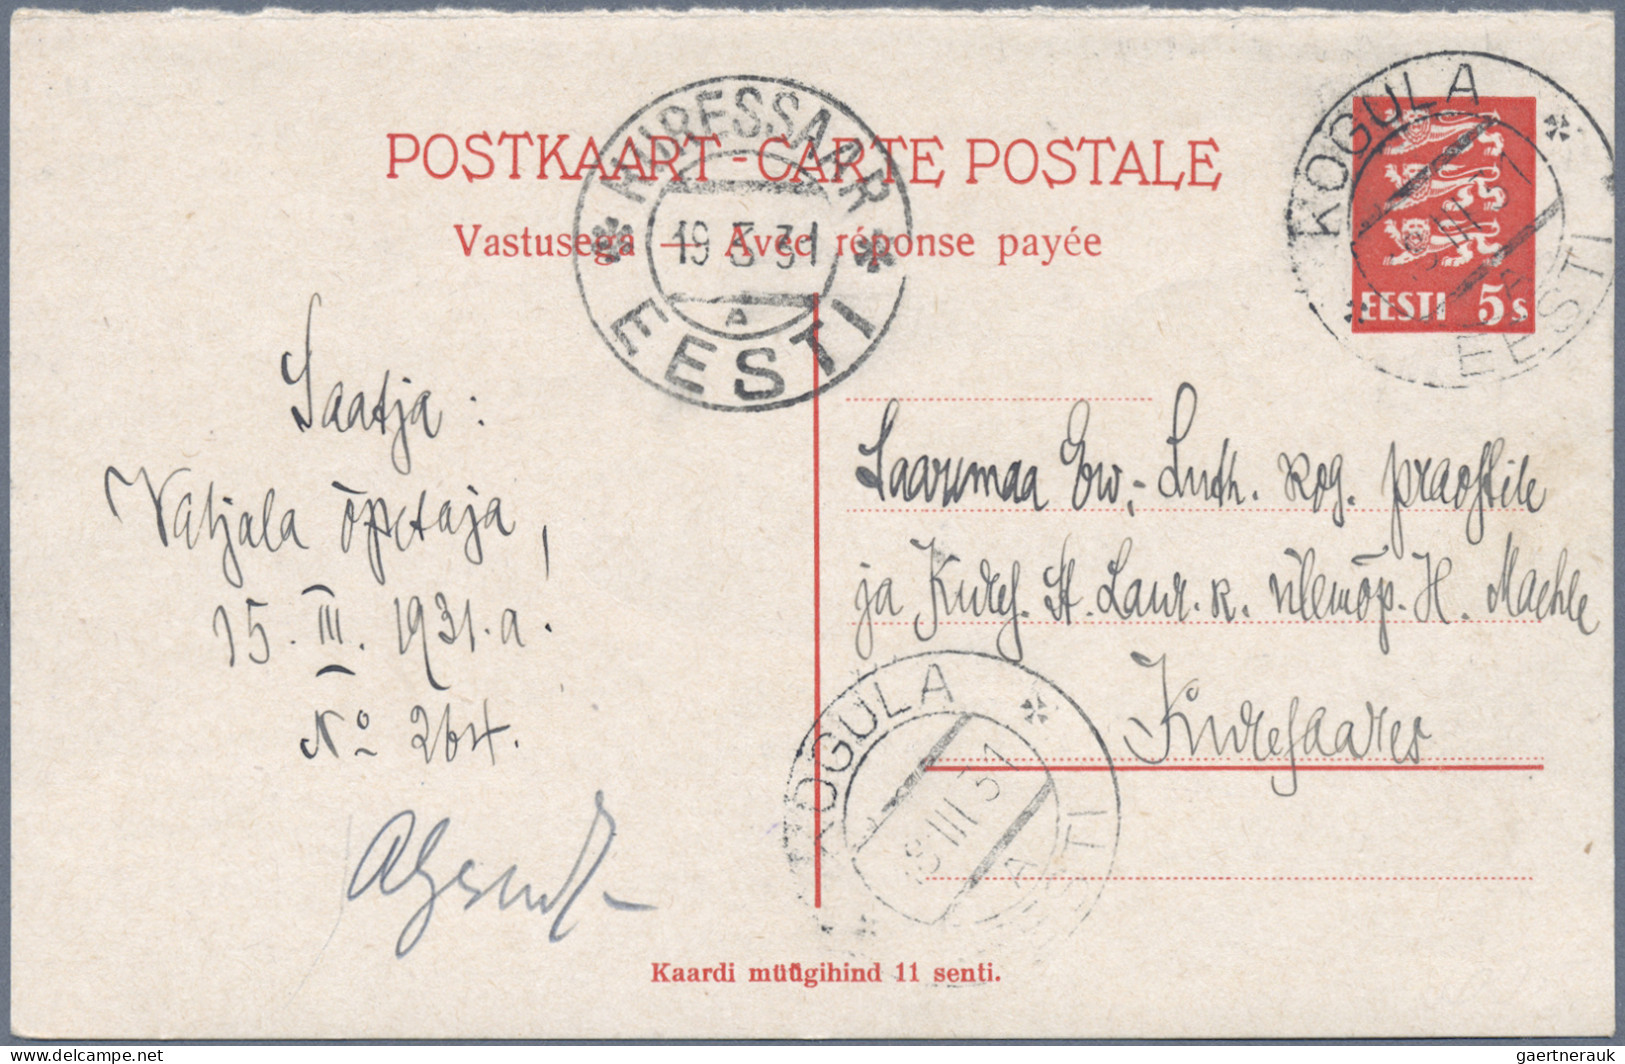 Estonia - postal stationery: 1923/1938, lot of twelve commercially used statione